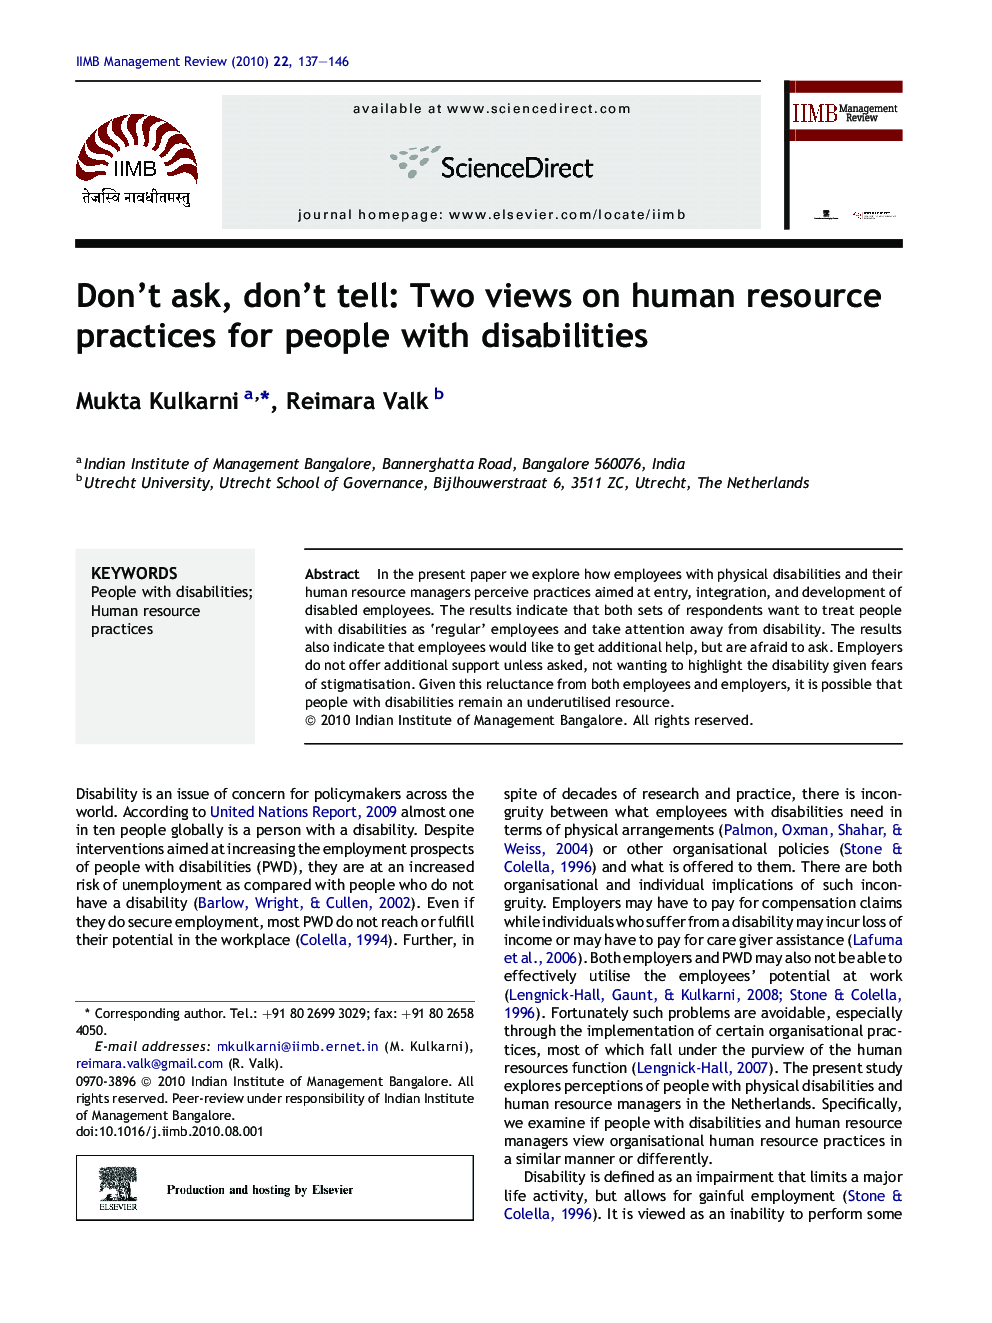 Don’t ask, don’t tell: Two views on human resource practices for people with disabilities